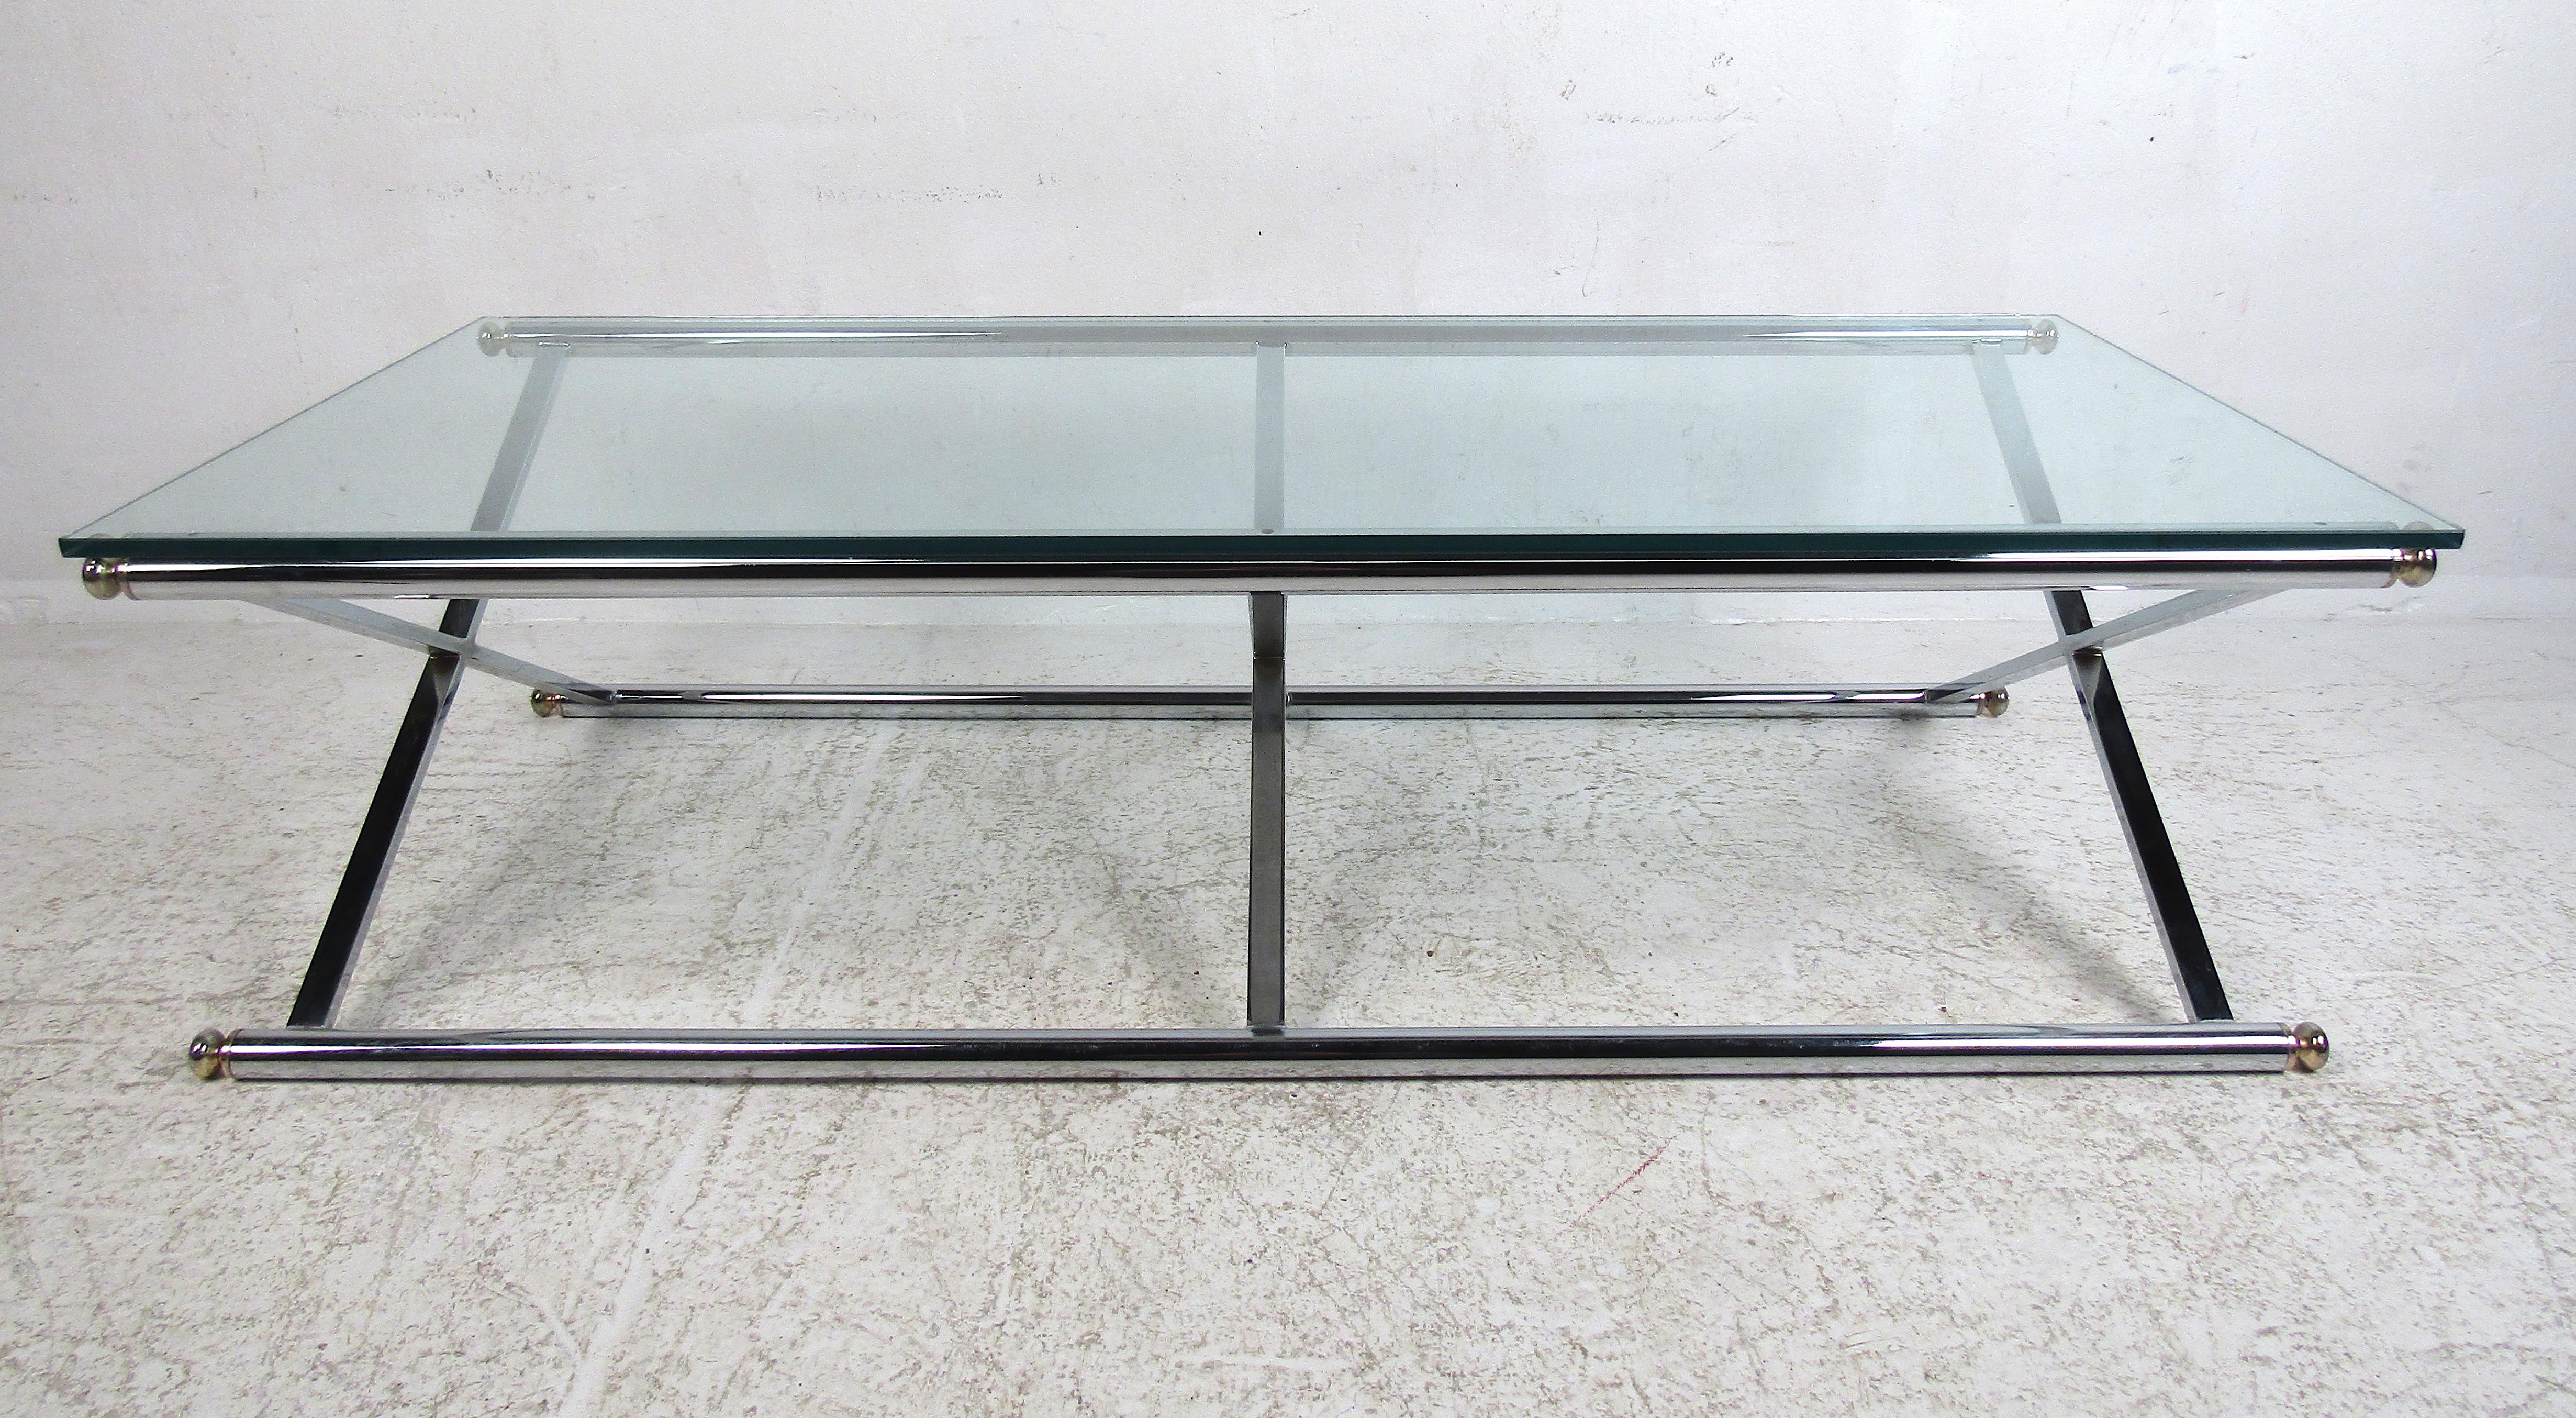 This beautiful vintage modern coffee table features a chrome base with a unique 